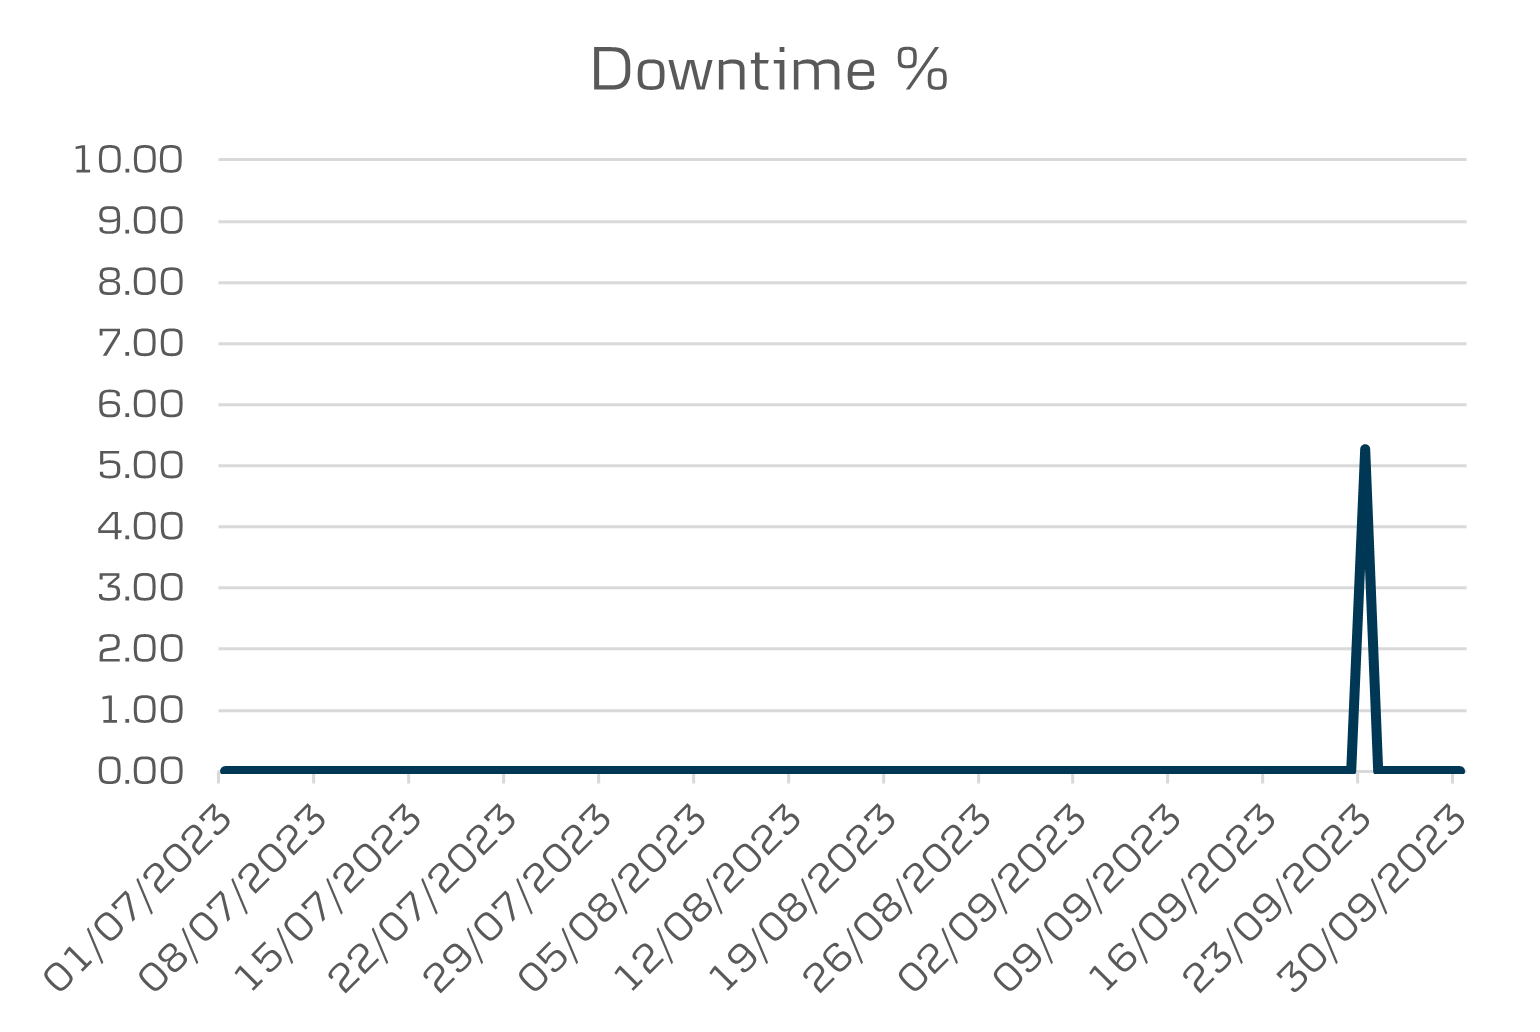 API Data District downtime